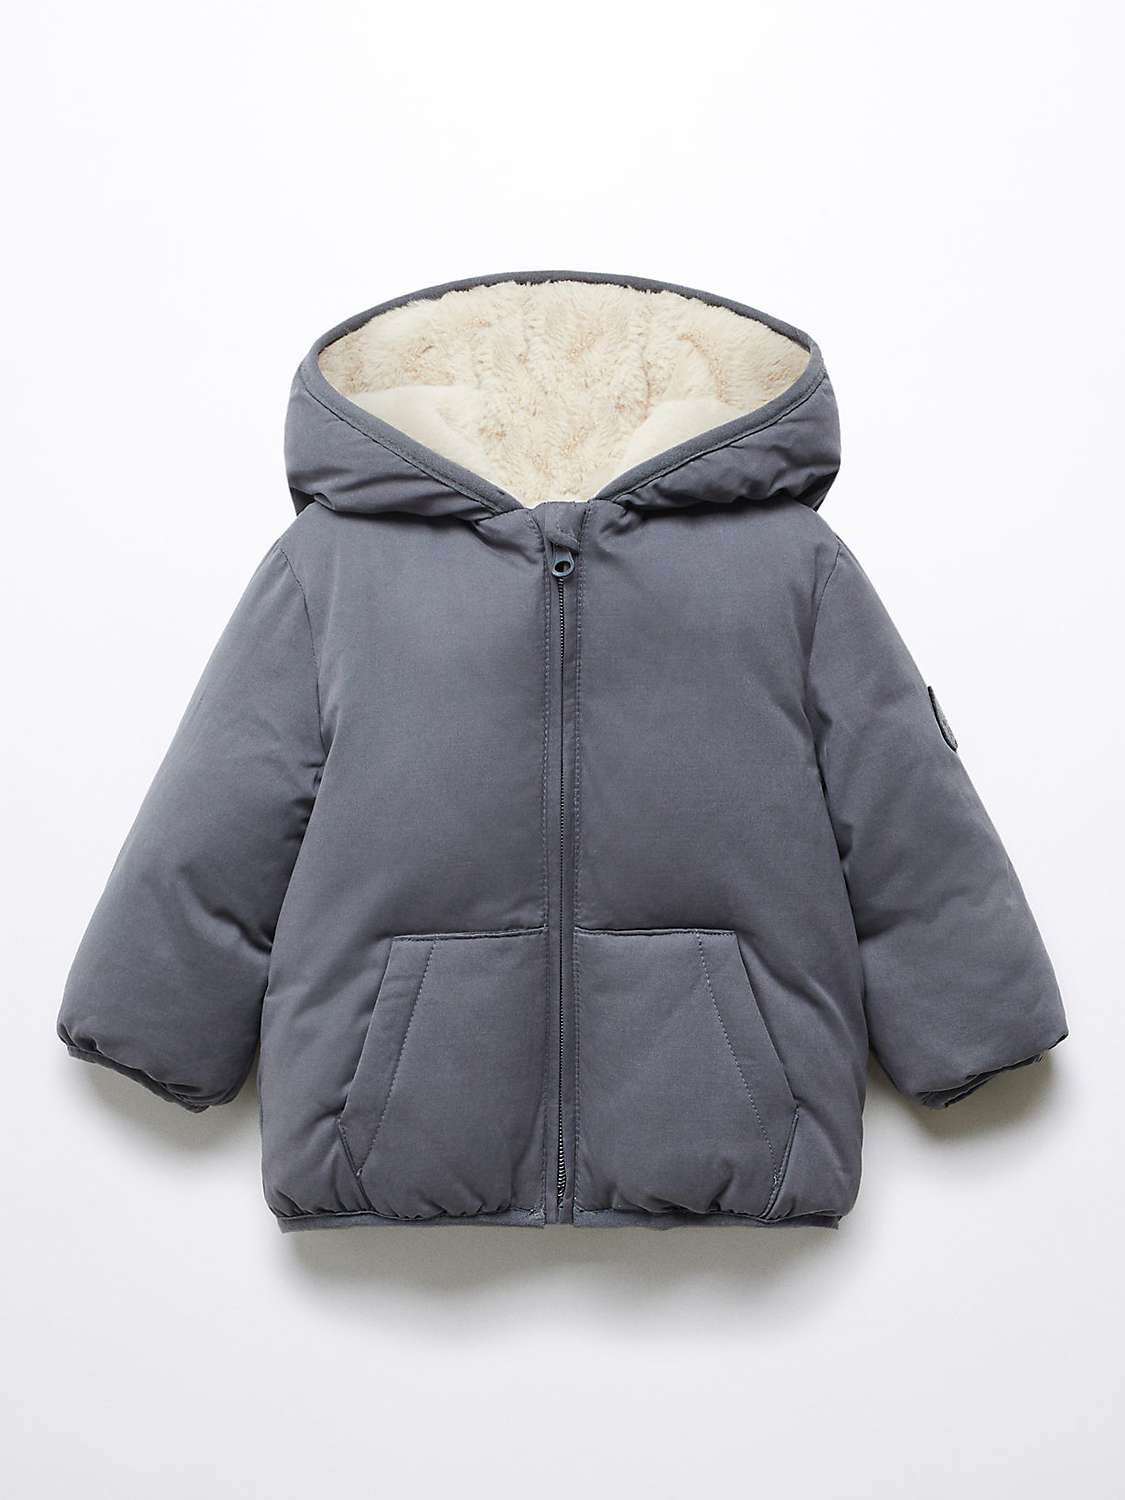 Buy Mango Baby Jordi Faux Shearling Lined Hooded Jacket, Charcoal Online at johnlewis.com